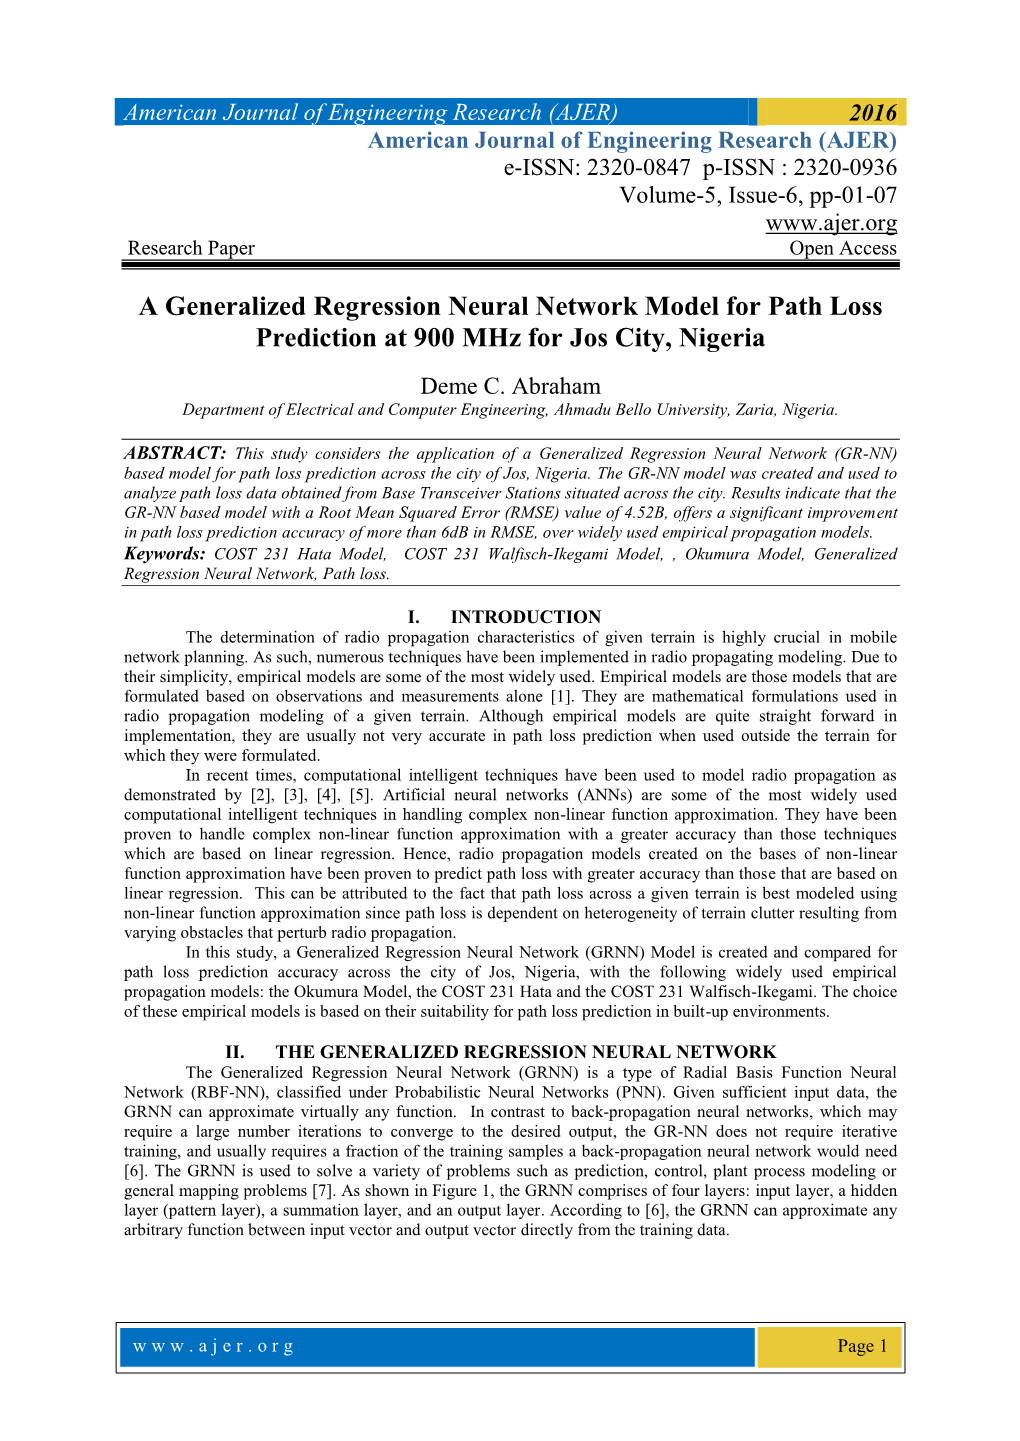 A Generalized Regression Neural Network Model for Path Loss Prediction at 900 Mhz for Jos City, Nigeria